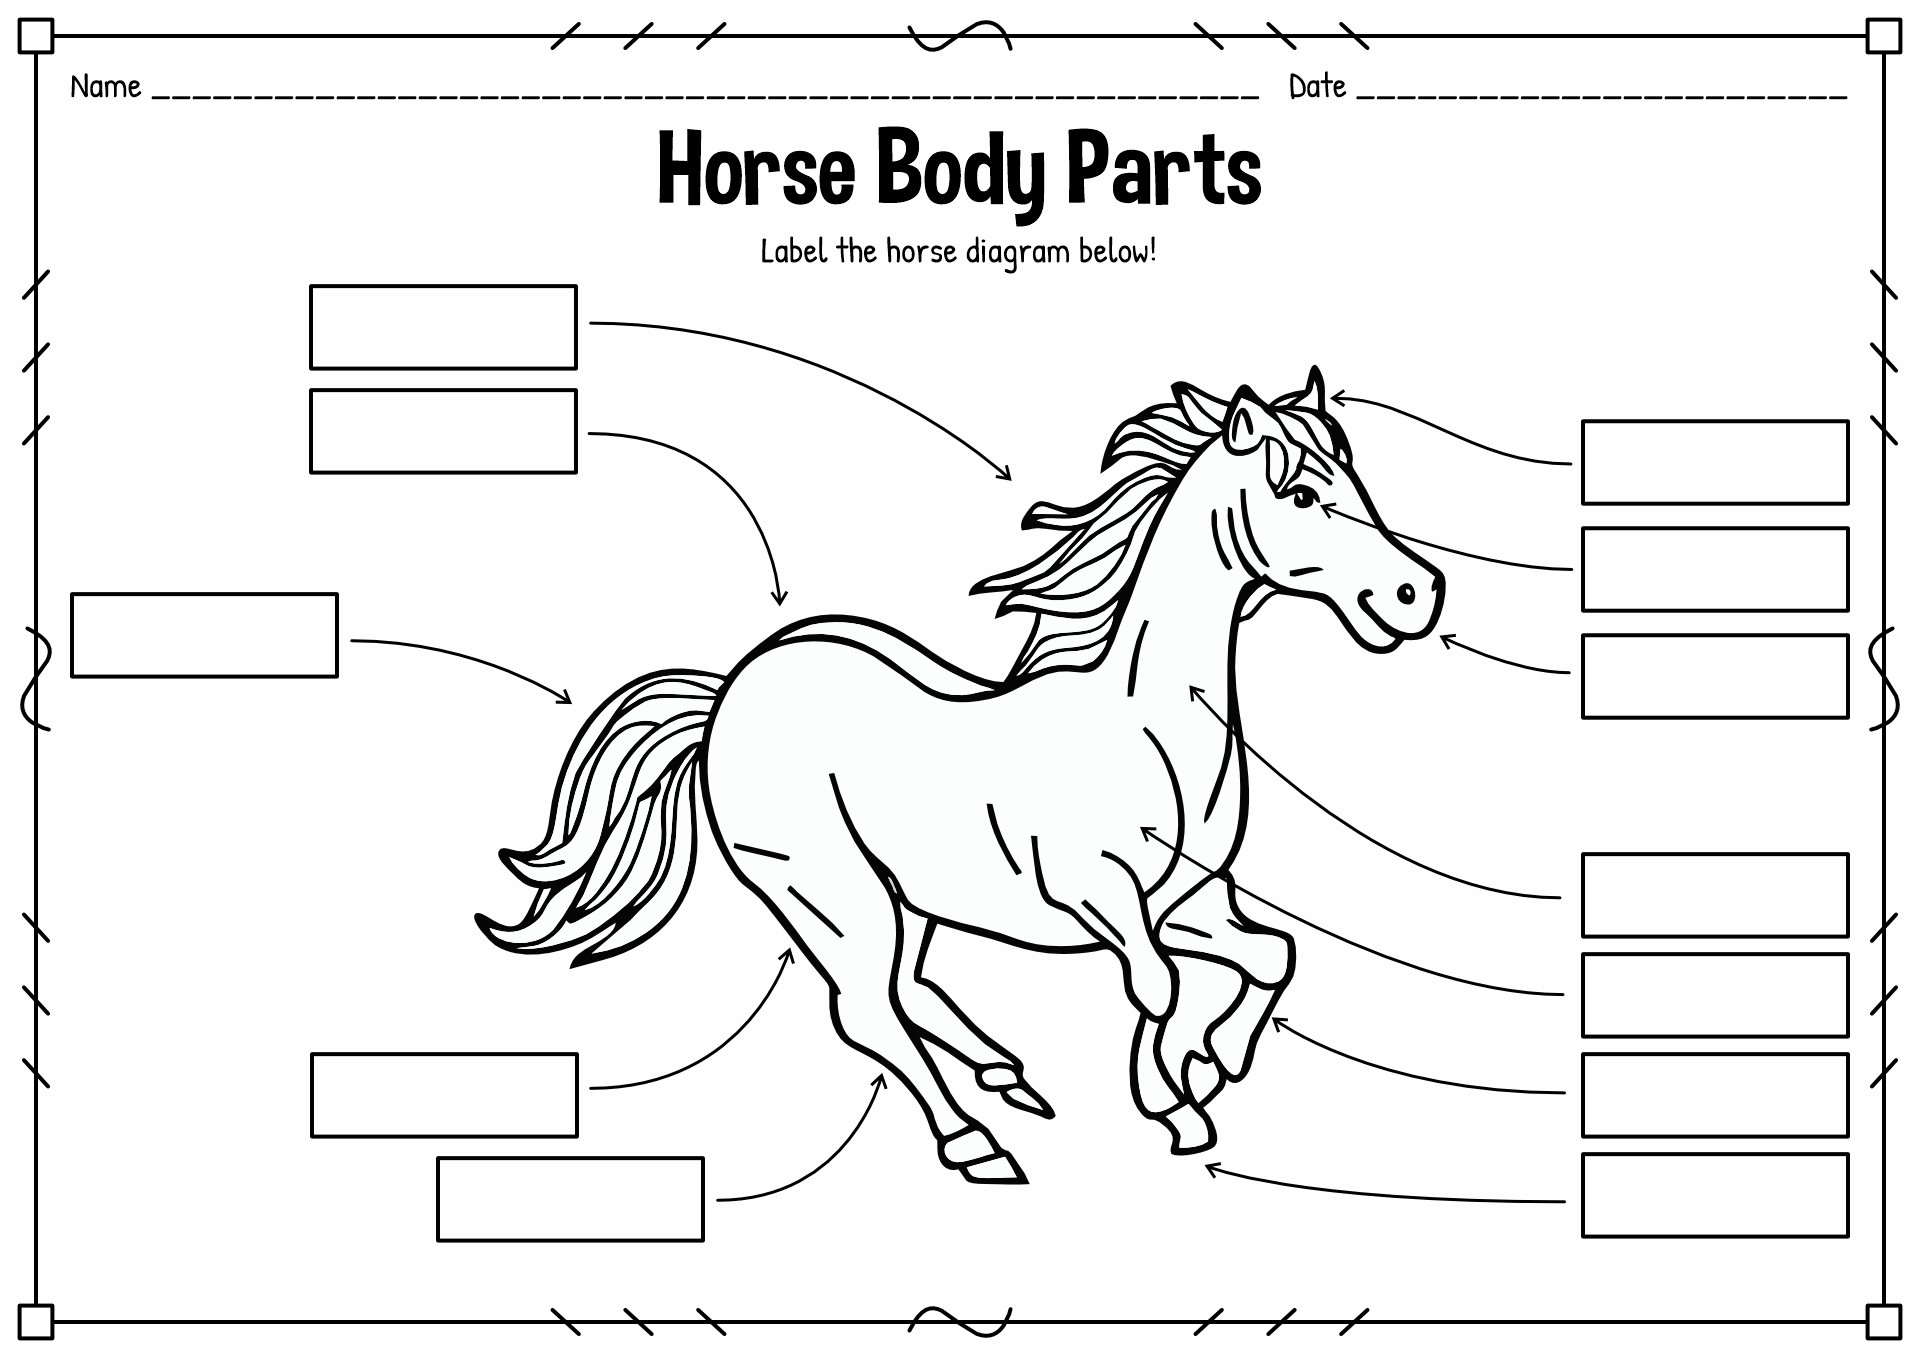 19 Best Images of Worksheet Parts Of A Horse Pony Club - Part Western ...